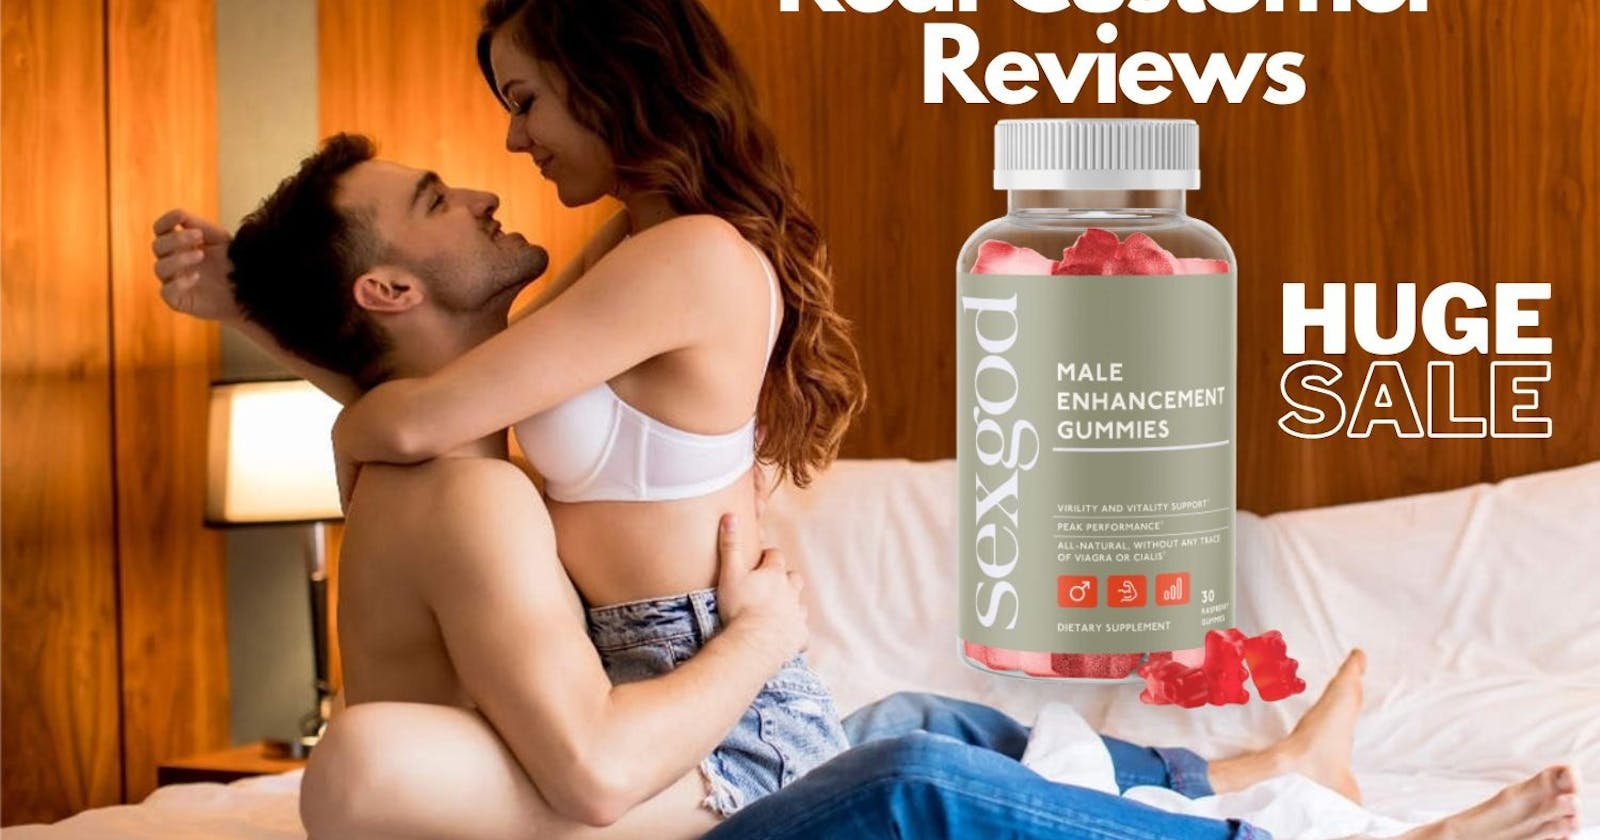 Sexgod Male Enhancement Gummies – Be Sexually Ready 24/7 And Longer Sexual Staying Power! Brand or Scam